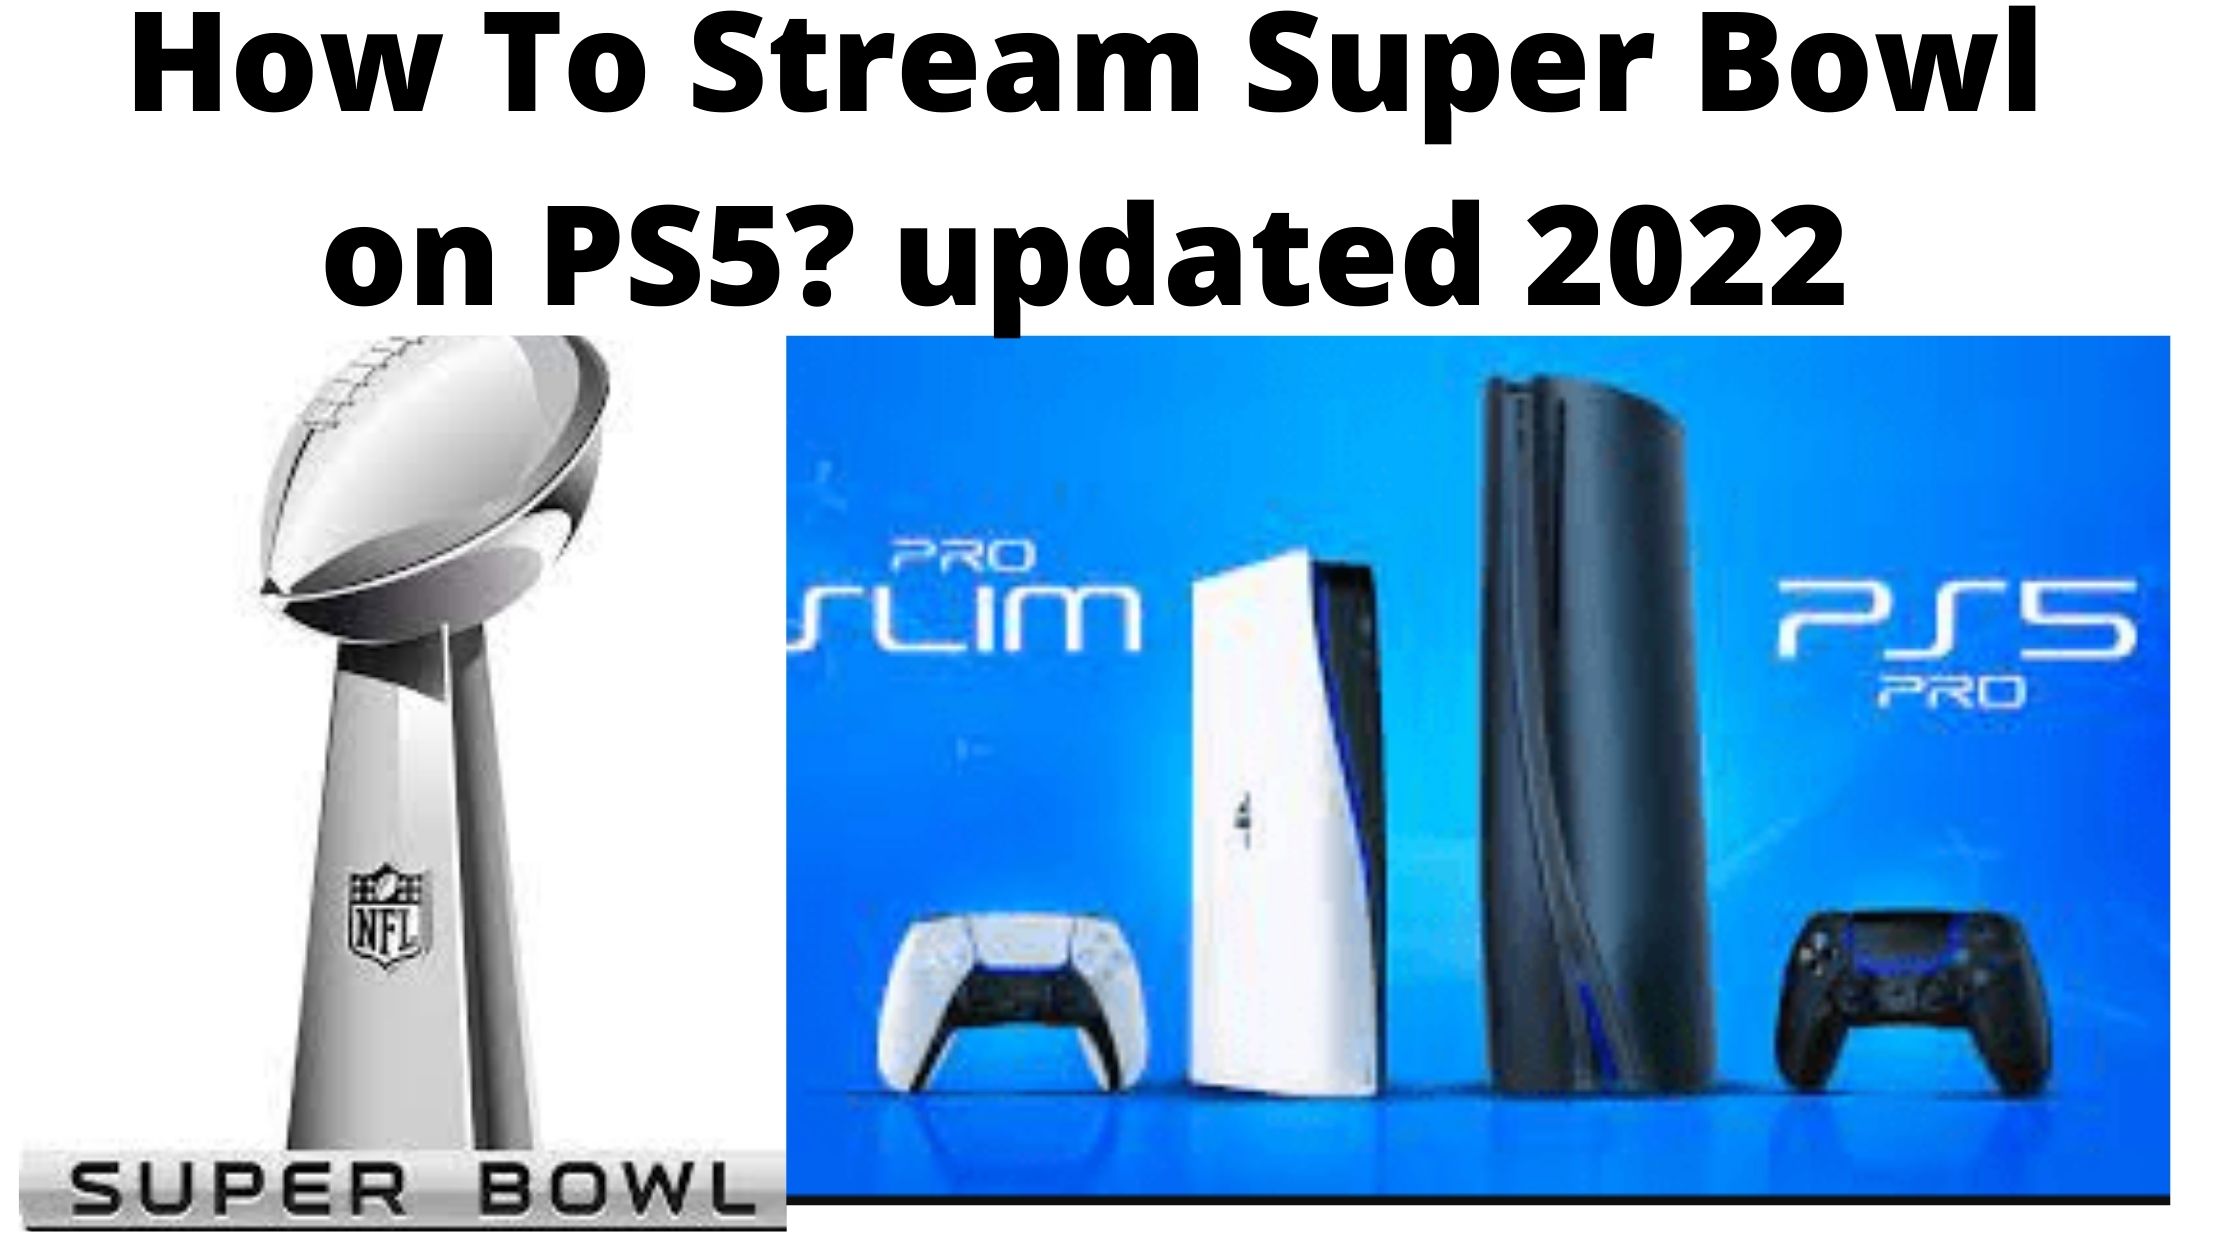 How To Stream Super Bowl on PS5? updated 2022